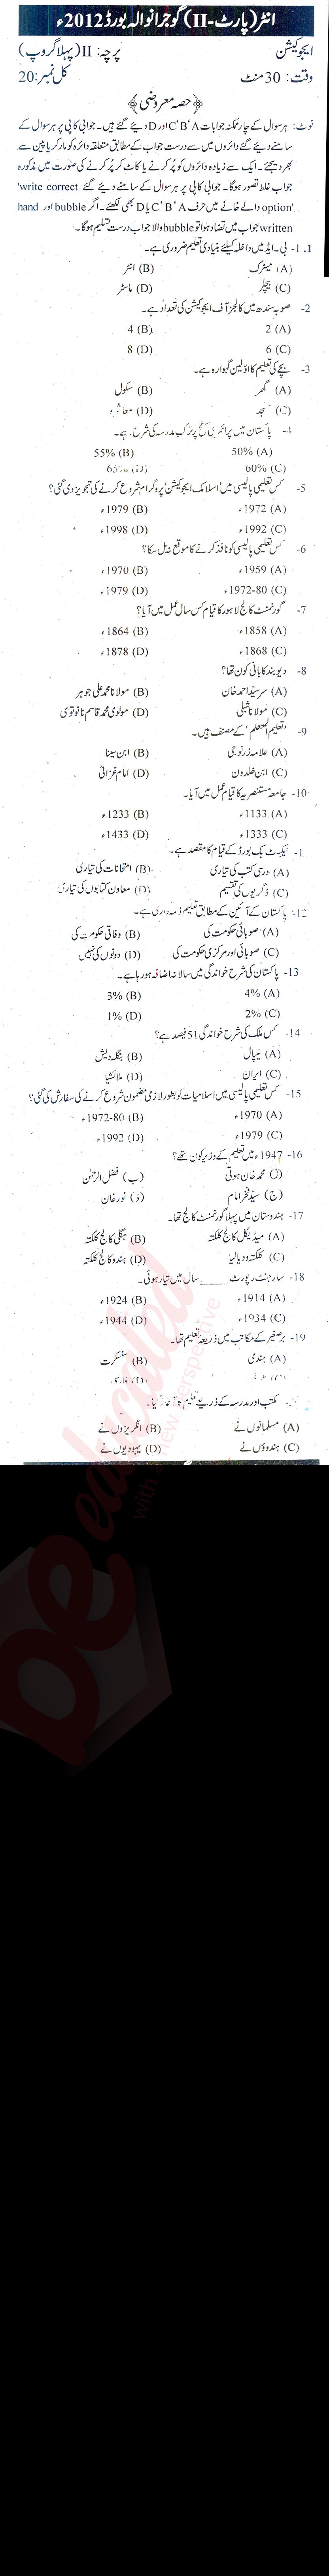 Education FA Part 2 Past Paper Group 1 BISE Gujranwala 2012